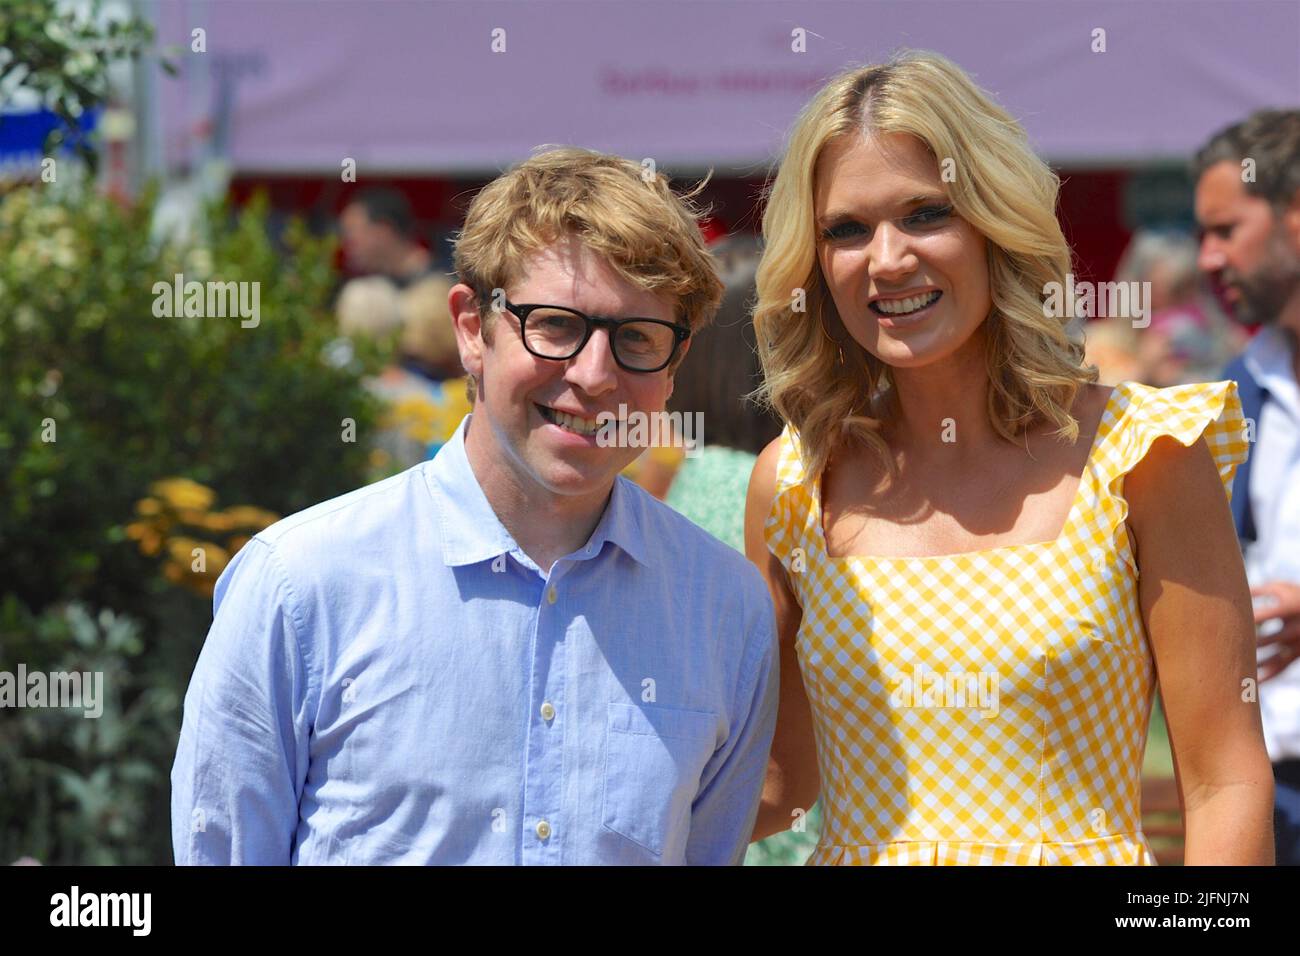 Hampton Court Palace, Surrey, UK - 04.06.2022, Josh Widdicombe (comedian and presenter) and Charlotte Hawkins (television/radio presenter, newsreader and journalist) at the opening day of the RHS Hampton Court Palace Garden Festival.  Held since 1993, the show is the most prestigious flower and garden event in the United Kingdom and the world’s largest annual flower show.  The show takes 18 months to plan and arrange and offers an eclectic mix of beautiful gardens, floral marquees and pavilions, spread over 34 acres, either side of the dramatic long water lake. Stock Photo